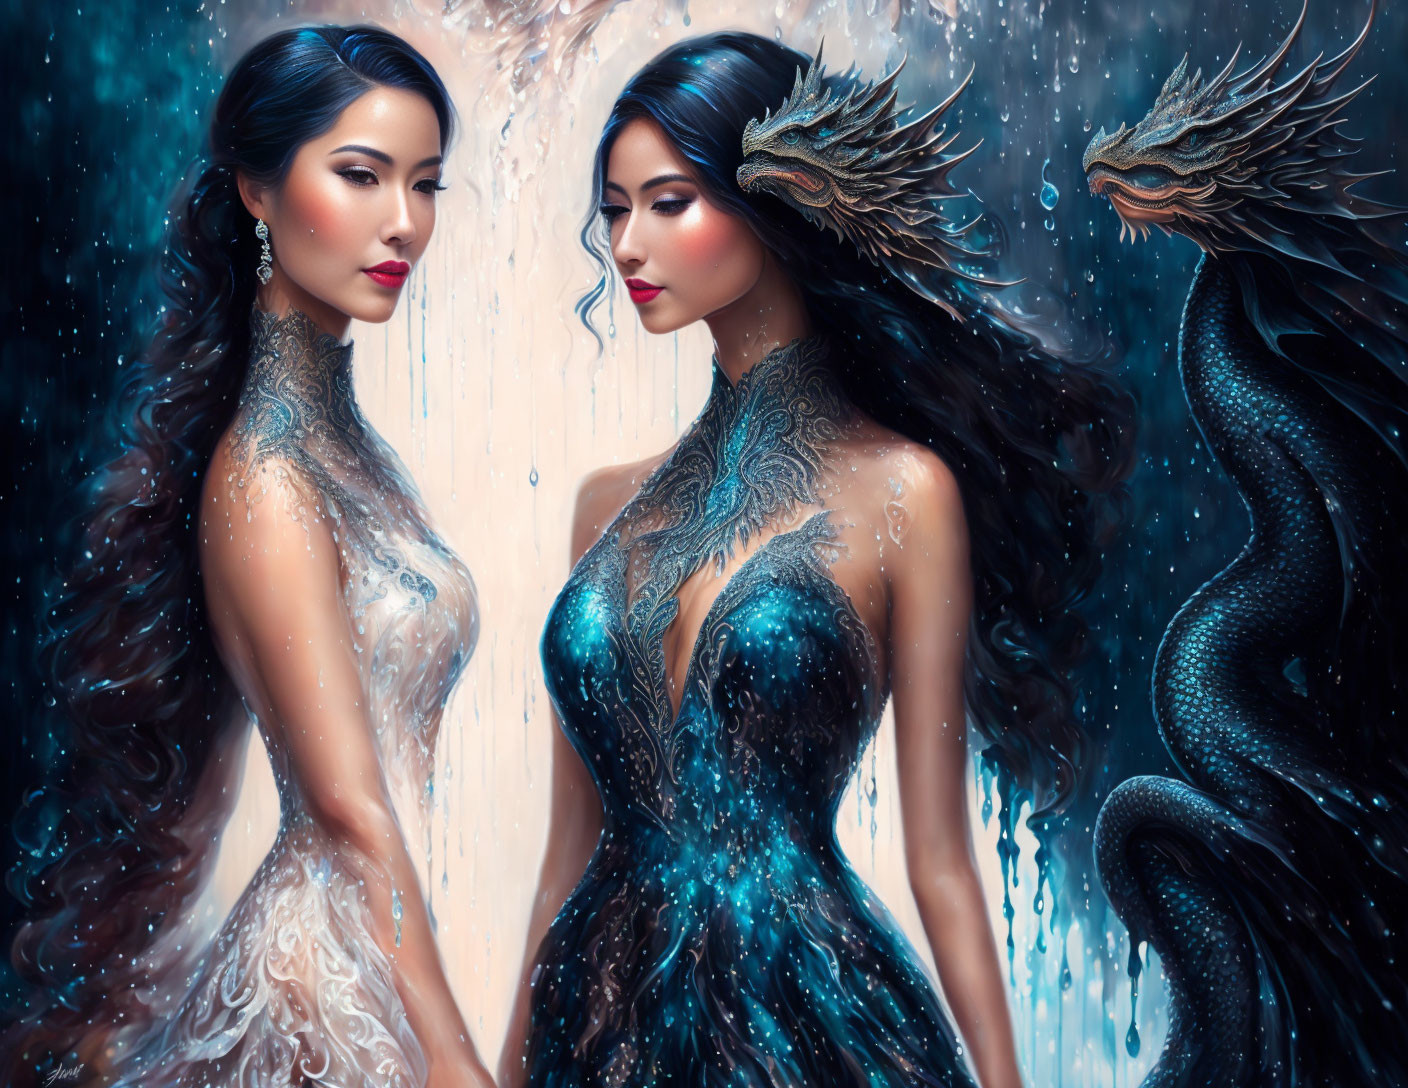 Dual women in elegant dresses with dragon-like creatures